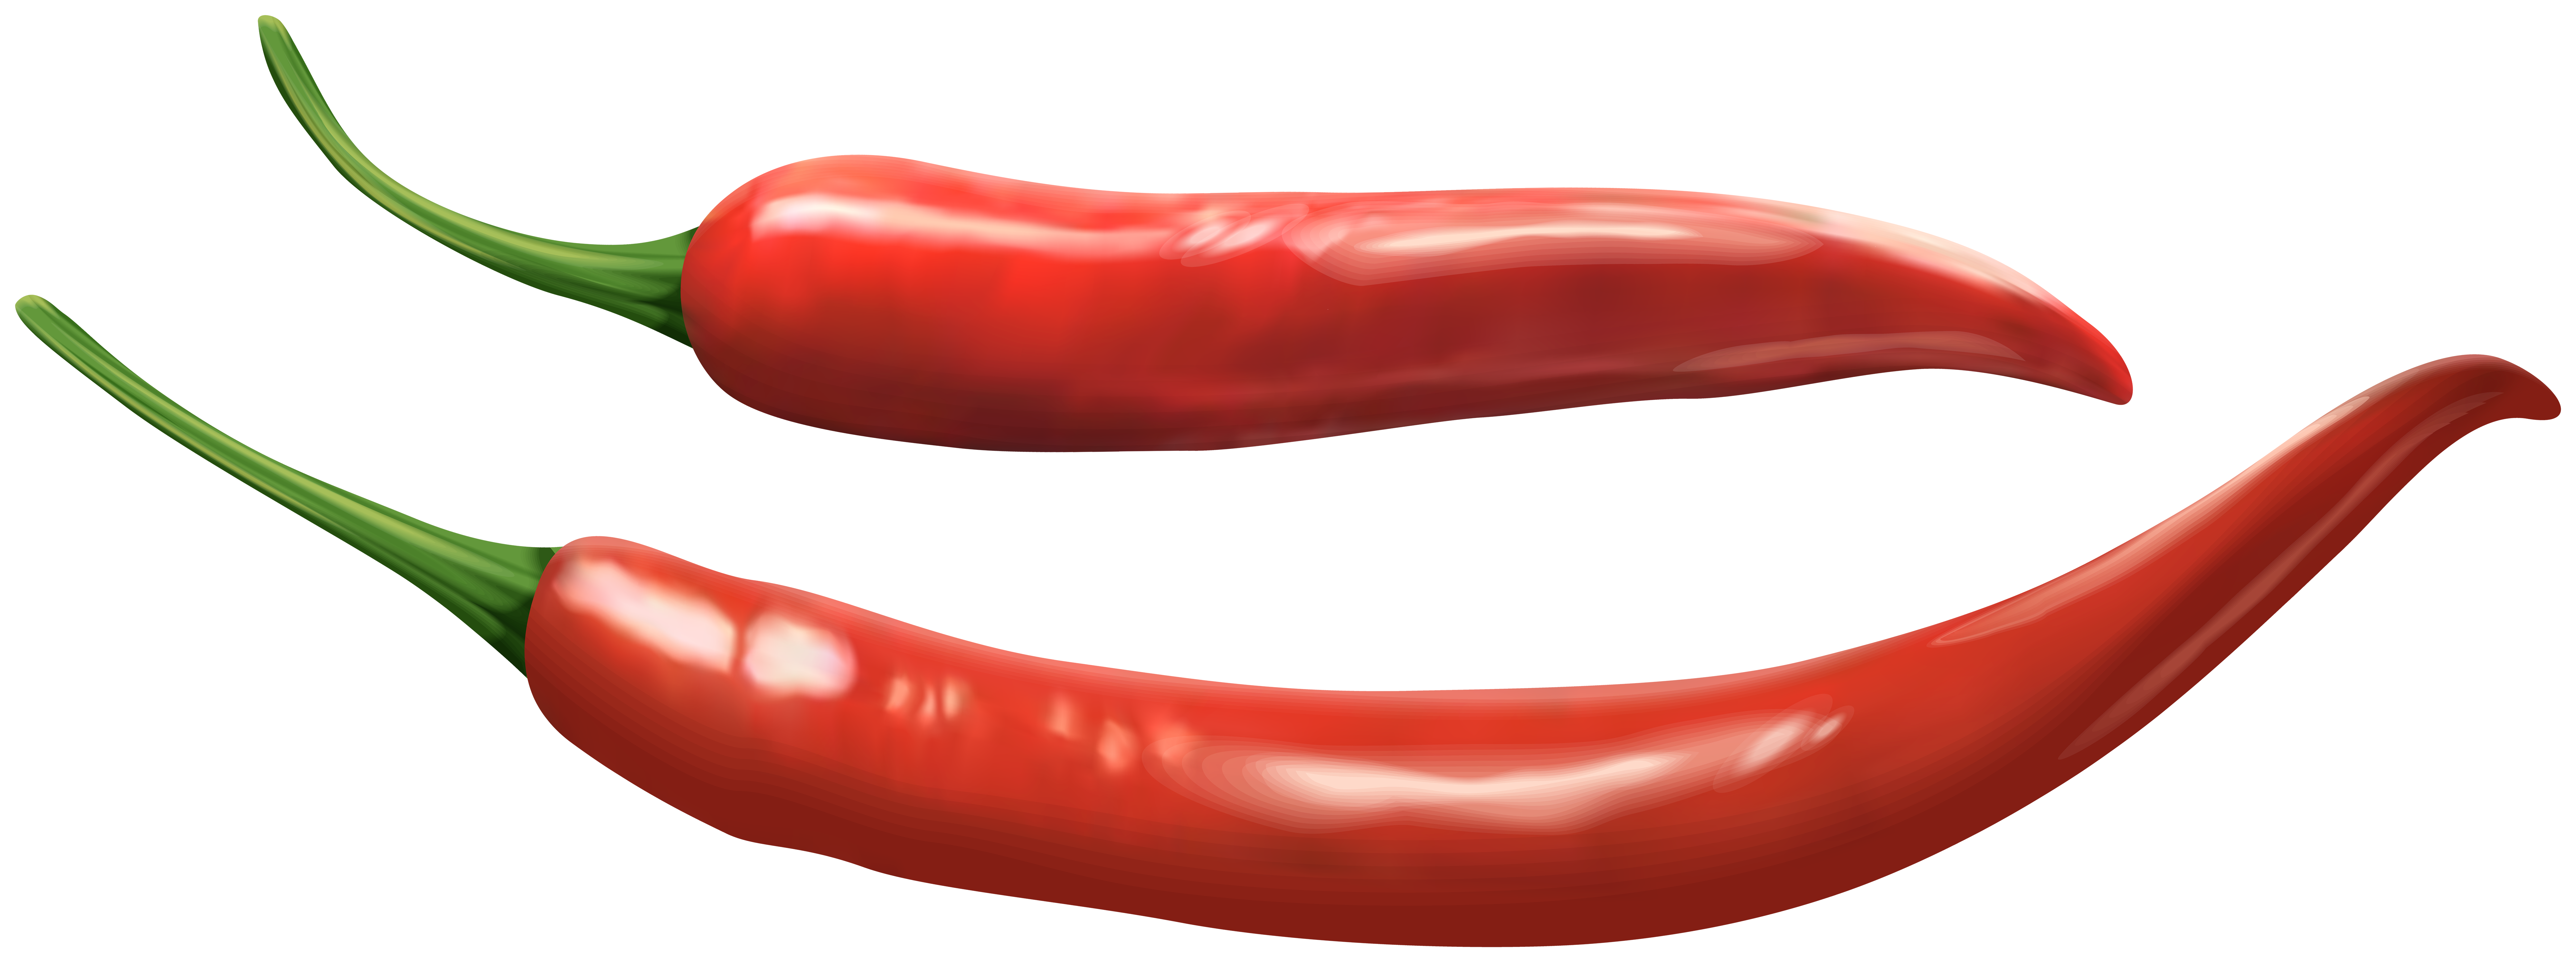 Red chilli pepper 22962240 PNG